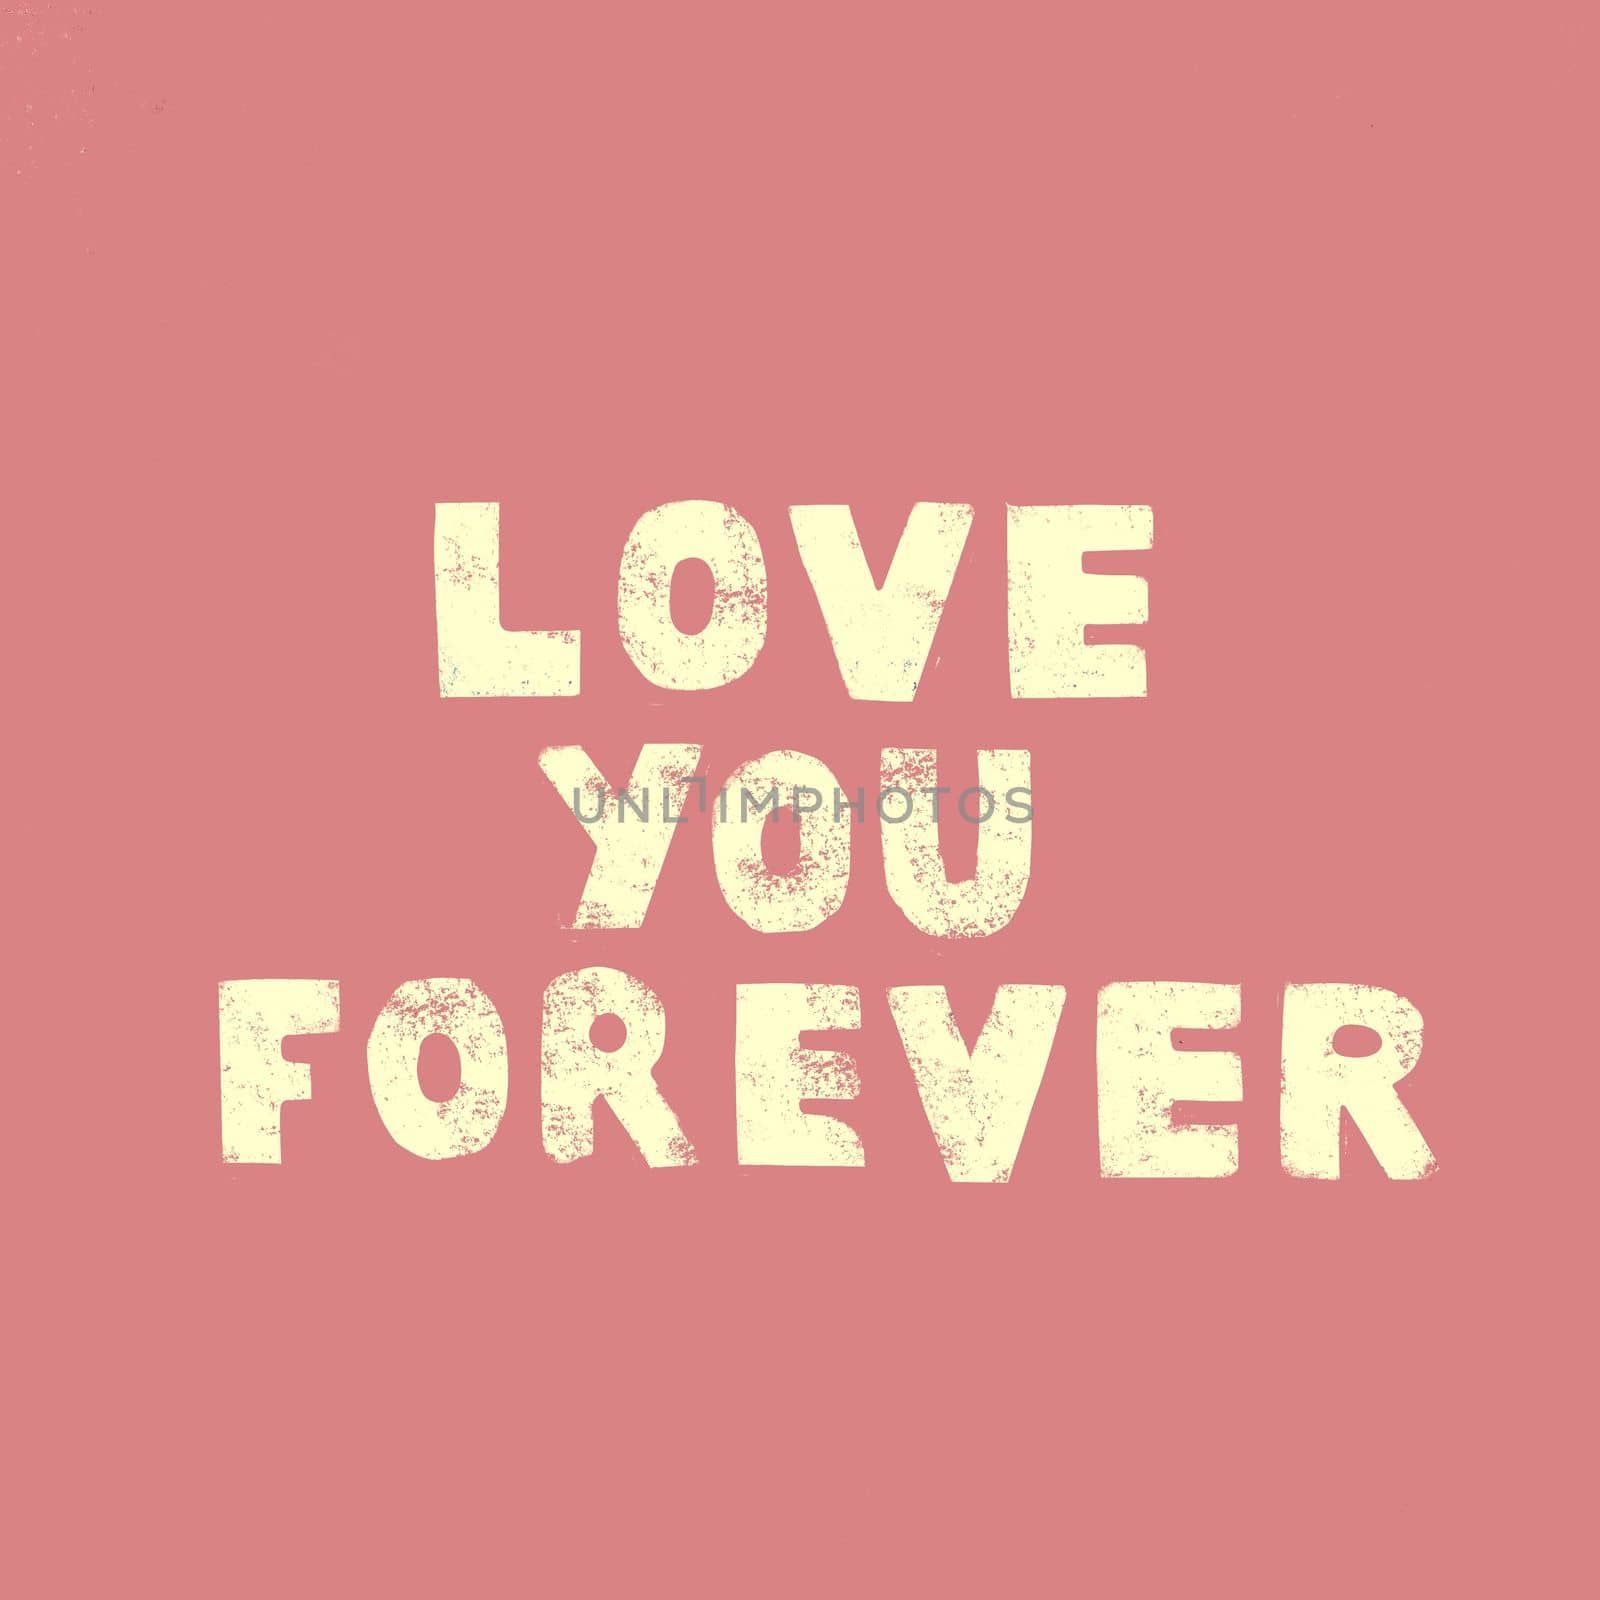 I love you forever. Inscription.Valentine's day greeting card by Dustick